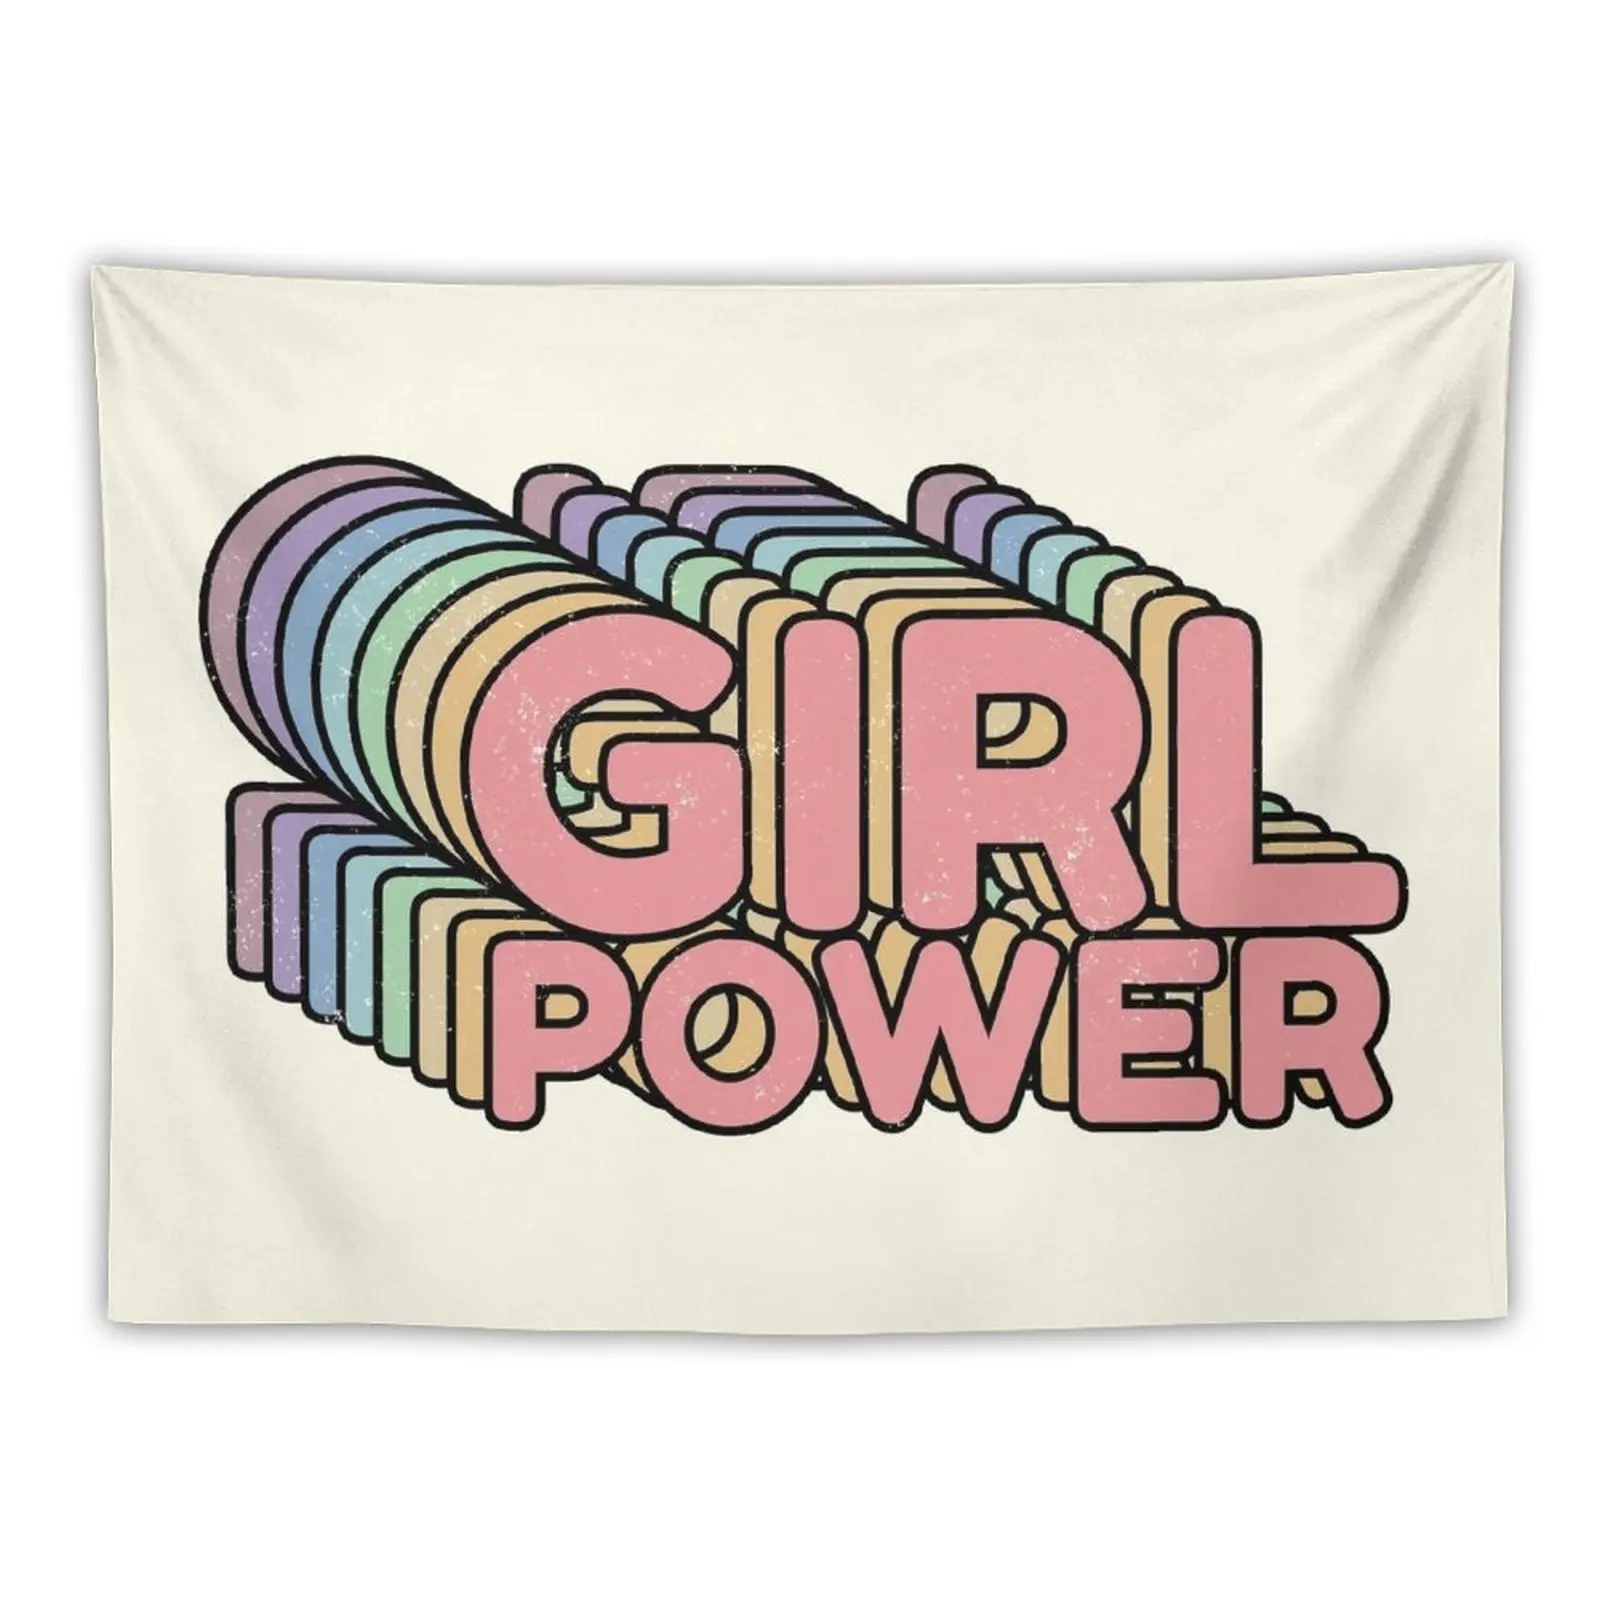 

GRL PWR - Girl Power cool Vintage distressed typography design 70s 80s cute Retro style Tee shirts Tapestry